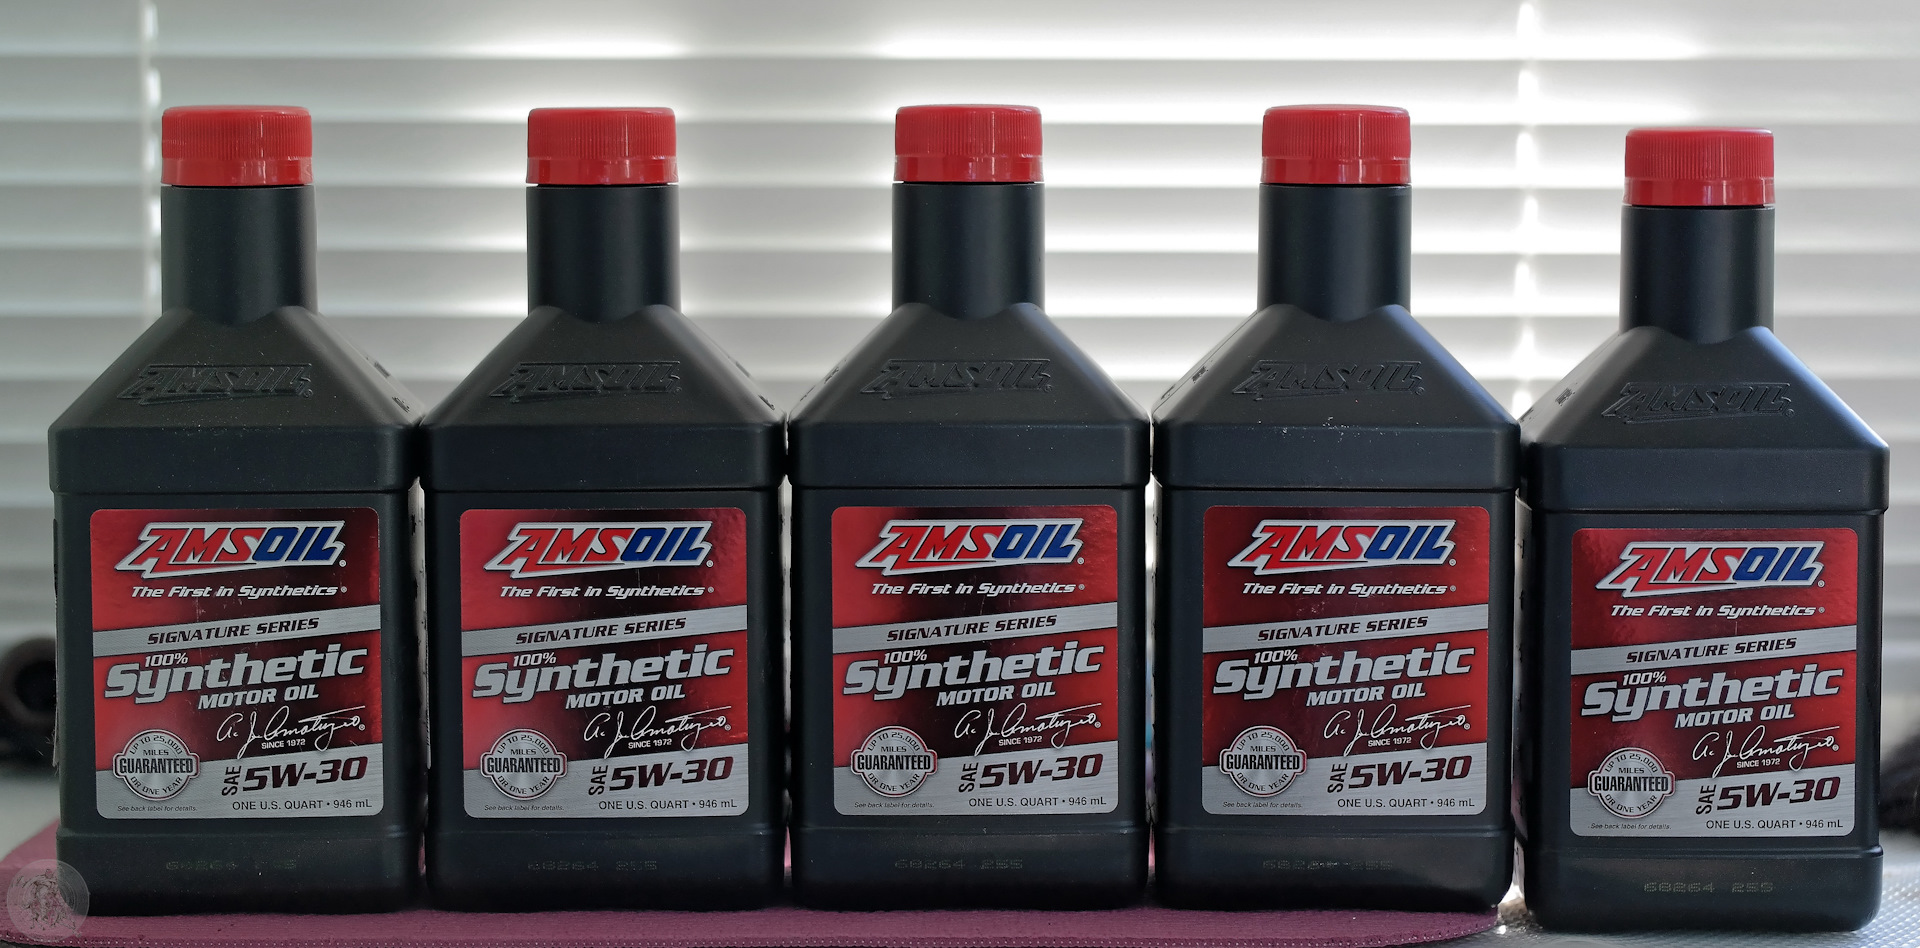 Amsoil signature series synthetic. AMSOIL Signature Series 100 Synthetic 5w-30. AMSOIL Signature Series 100% Synthetic 5w30 (asl1g),. AMSOIL 5w30. Моторное масло AMSOIL 5w30.